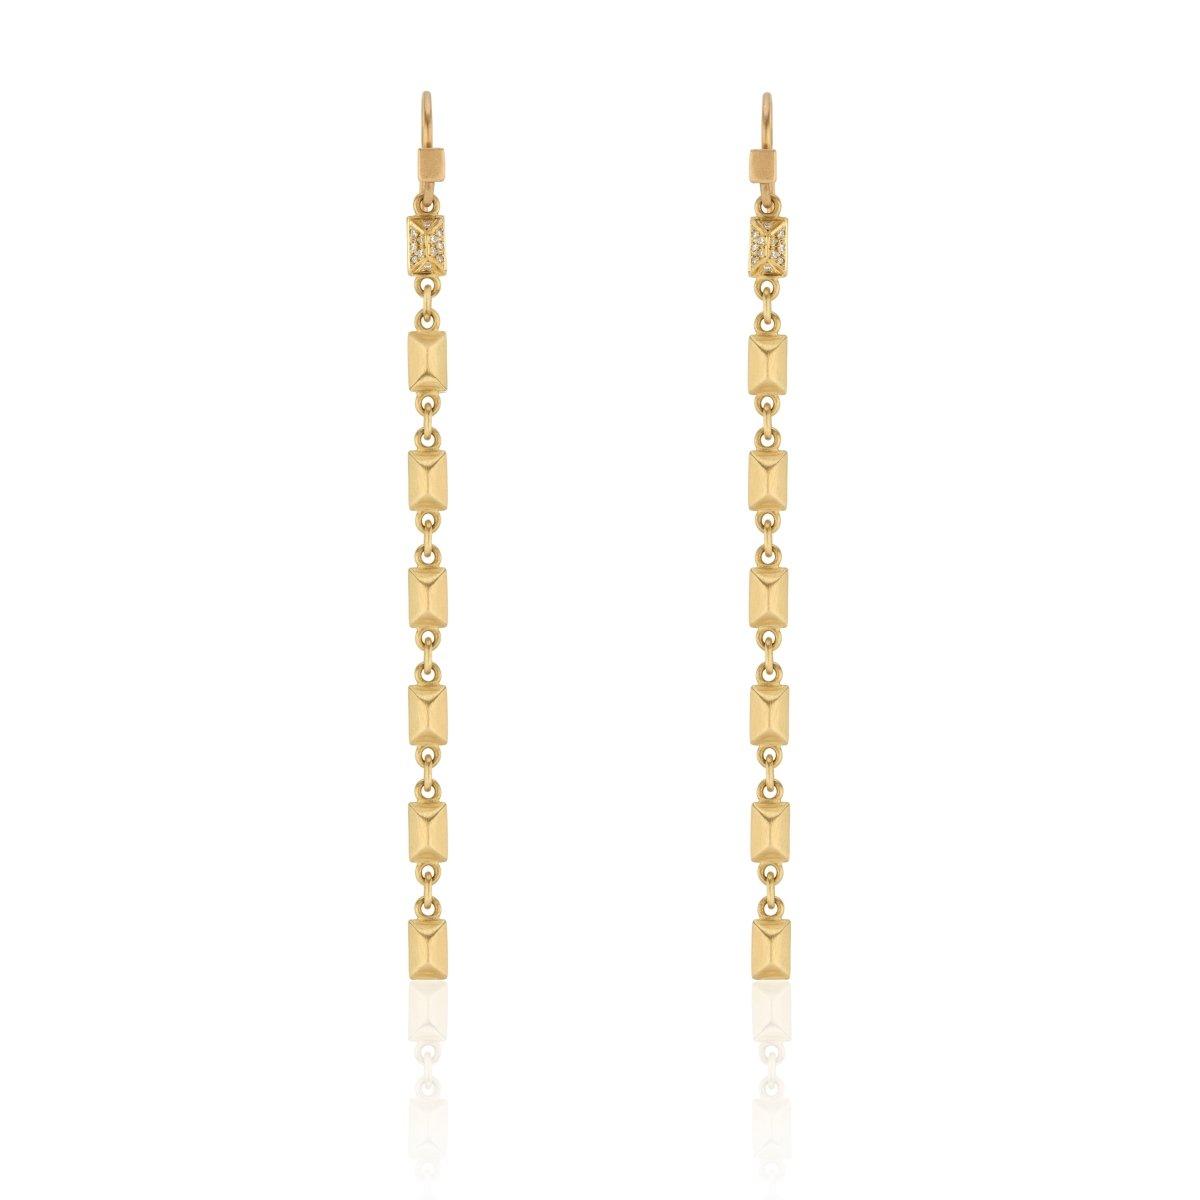 Sparks Fly Pave Diamond Earrings - Nataly Aponte